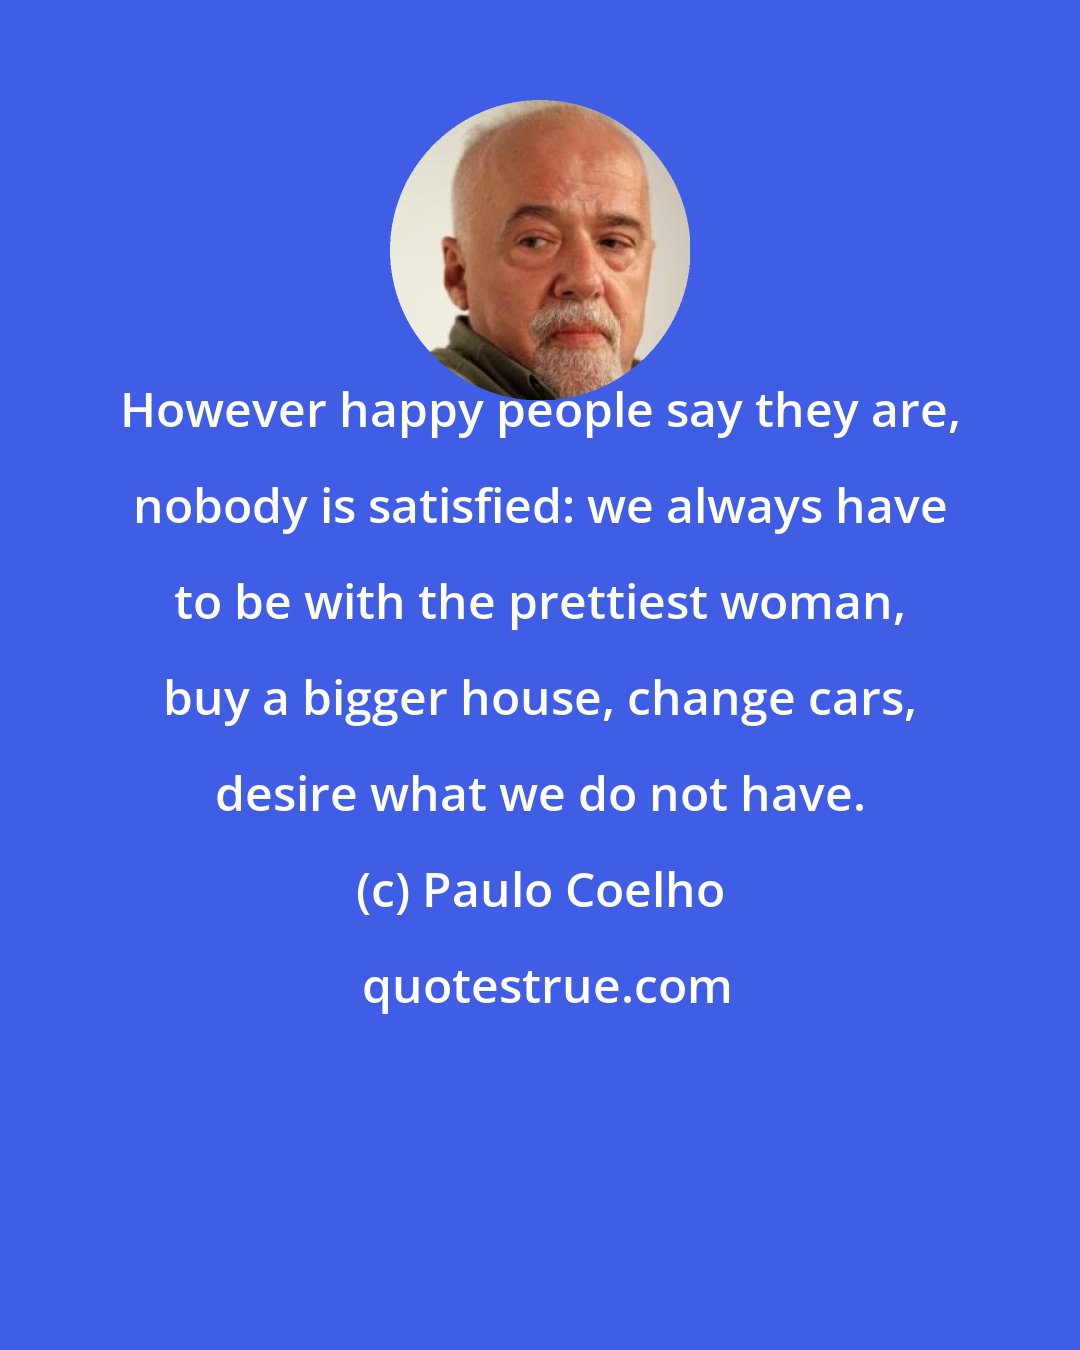 Paulo Coelho: However happy people say they are, nobody is satisfied: we always have to be with the prettiest woman, buy a bigger house, change cars, desire what we do not have.